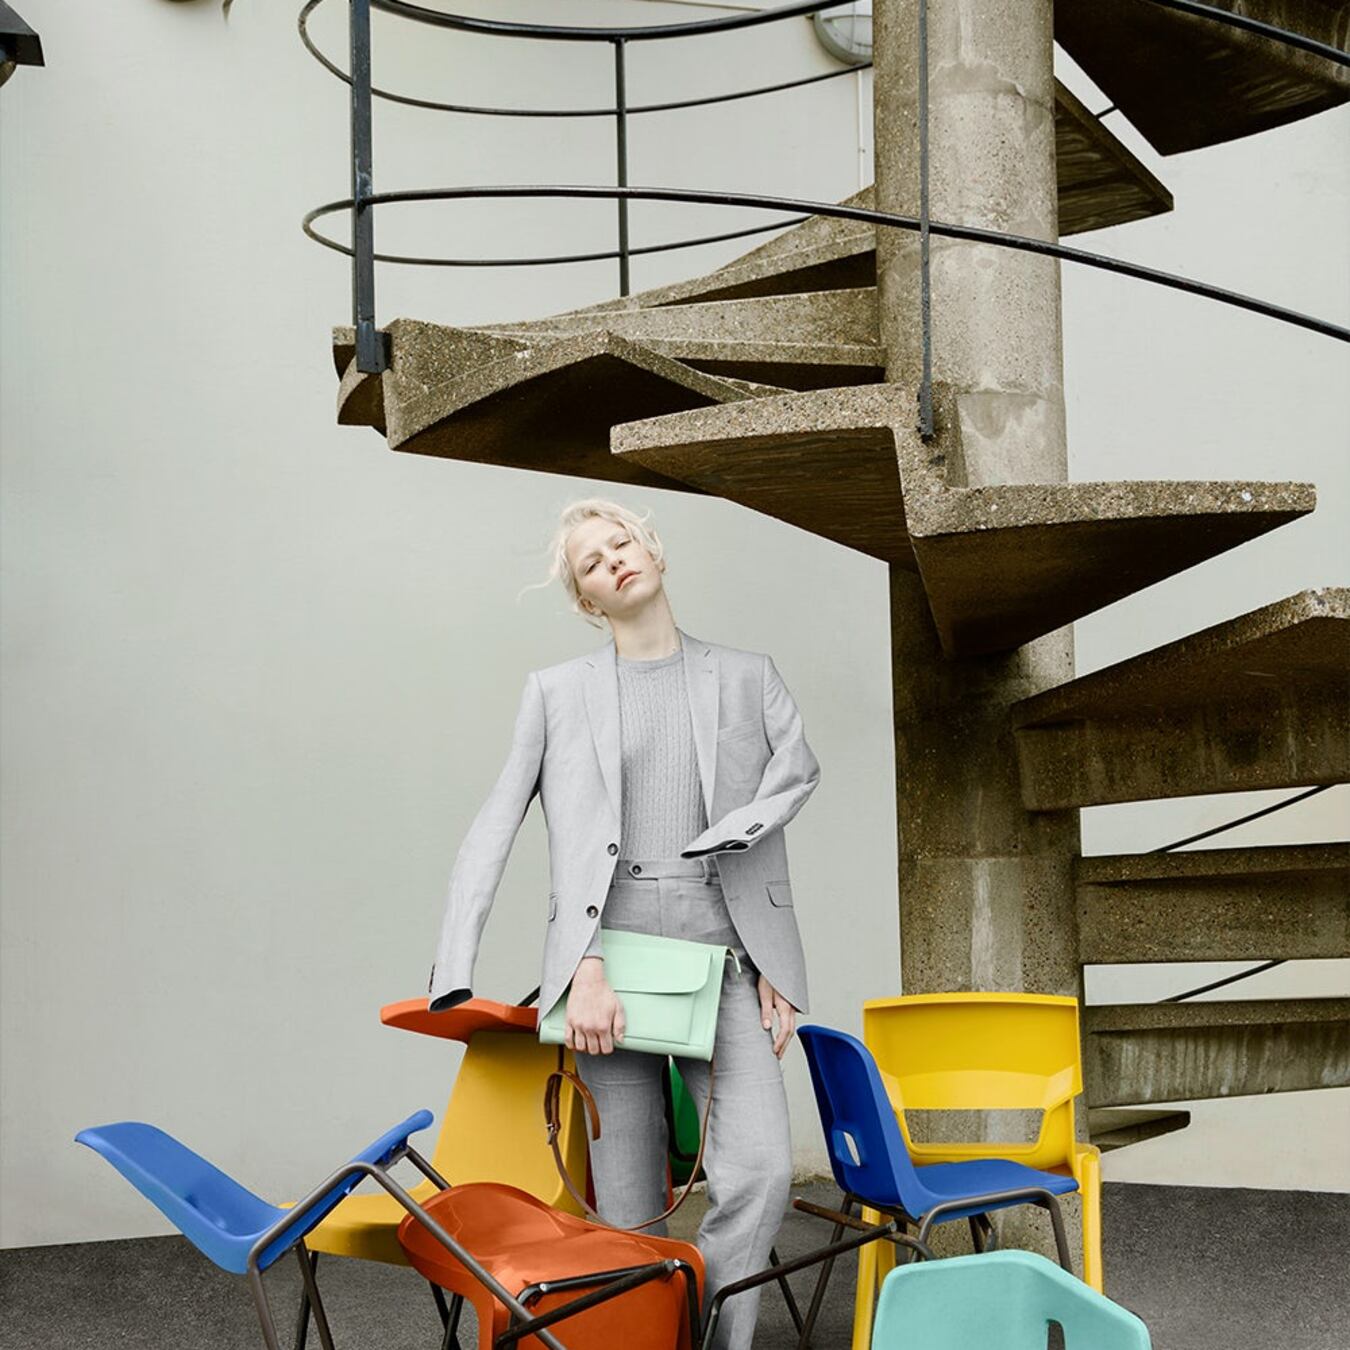 Project-Ally Capellino SS17 Campaign: Plastic Chairs